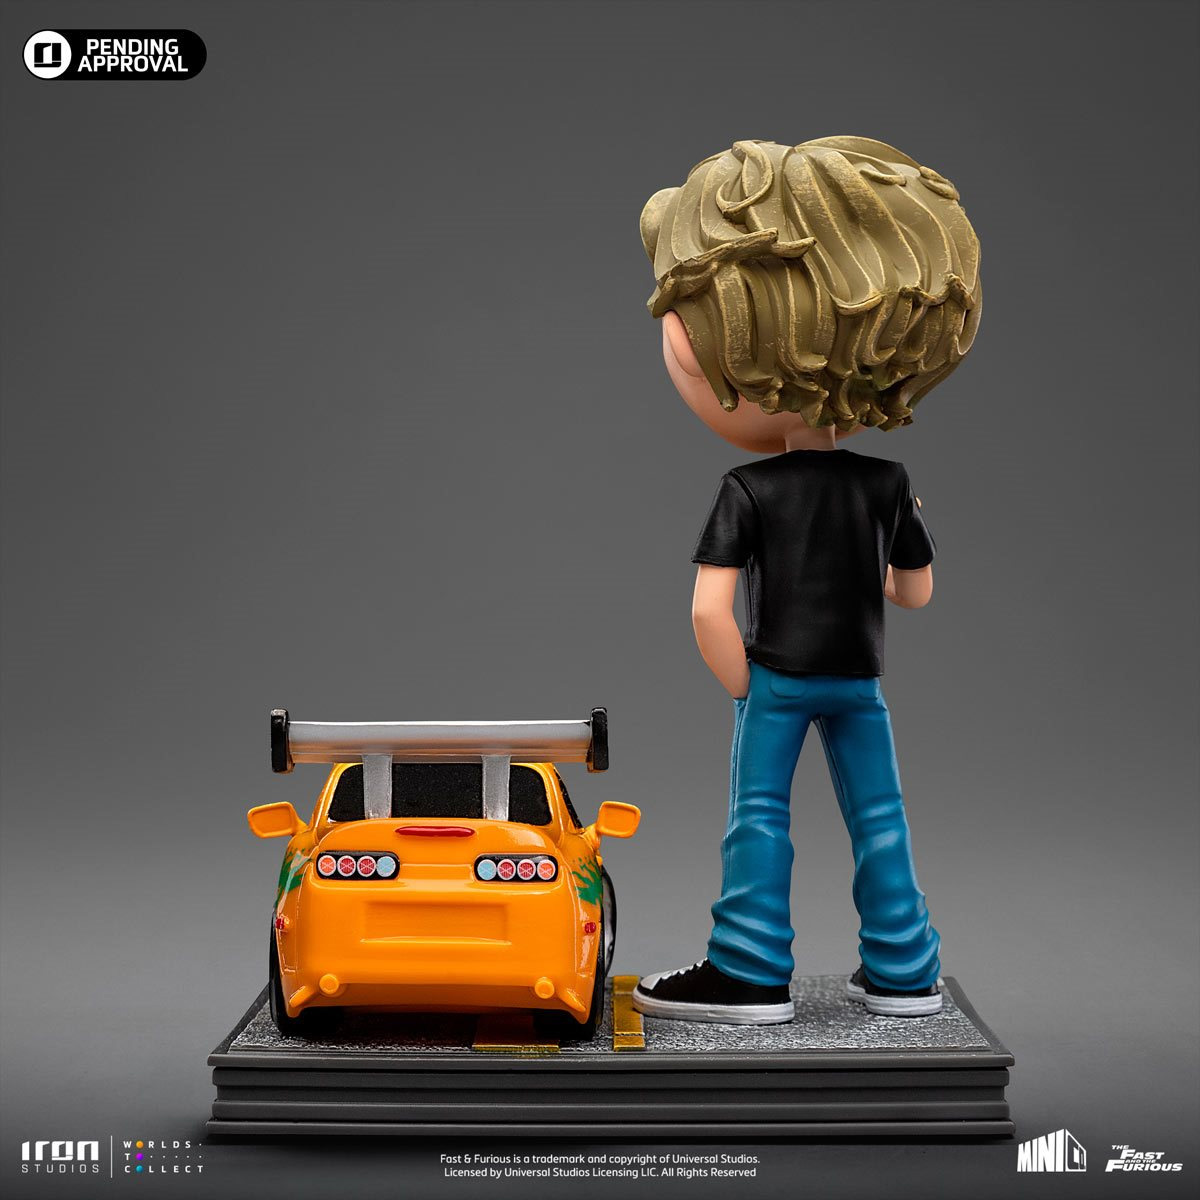 Fast and Furious Mini Co. with Dominic Toretto and Brian O'Conner (Iron Studios)